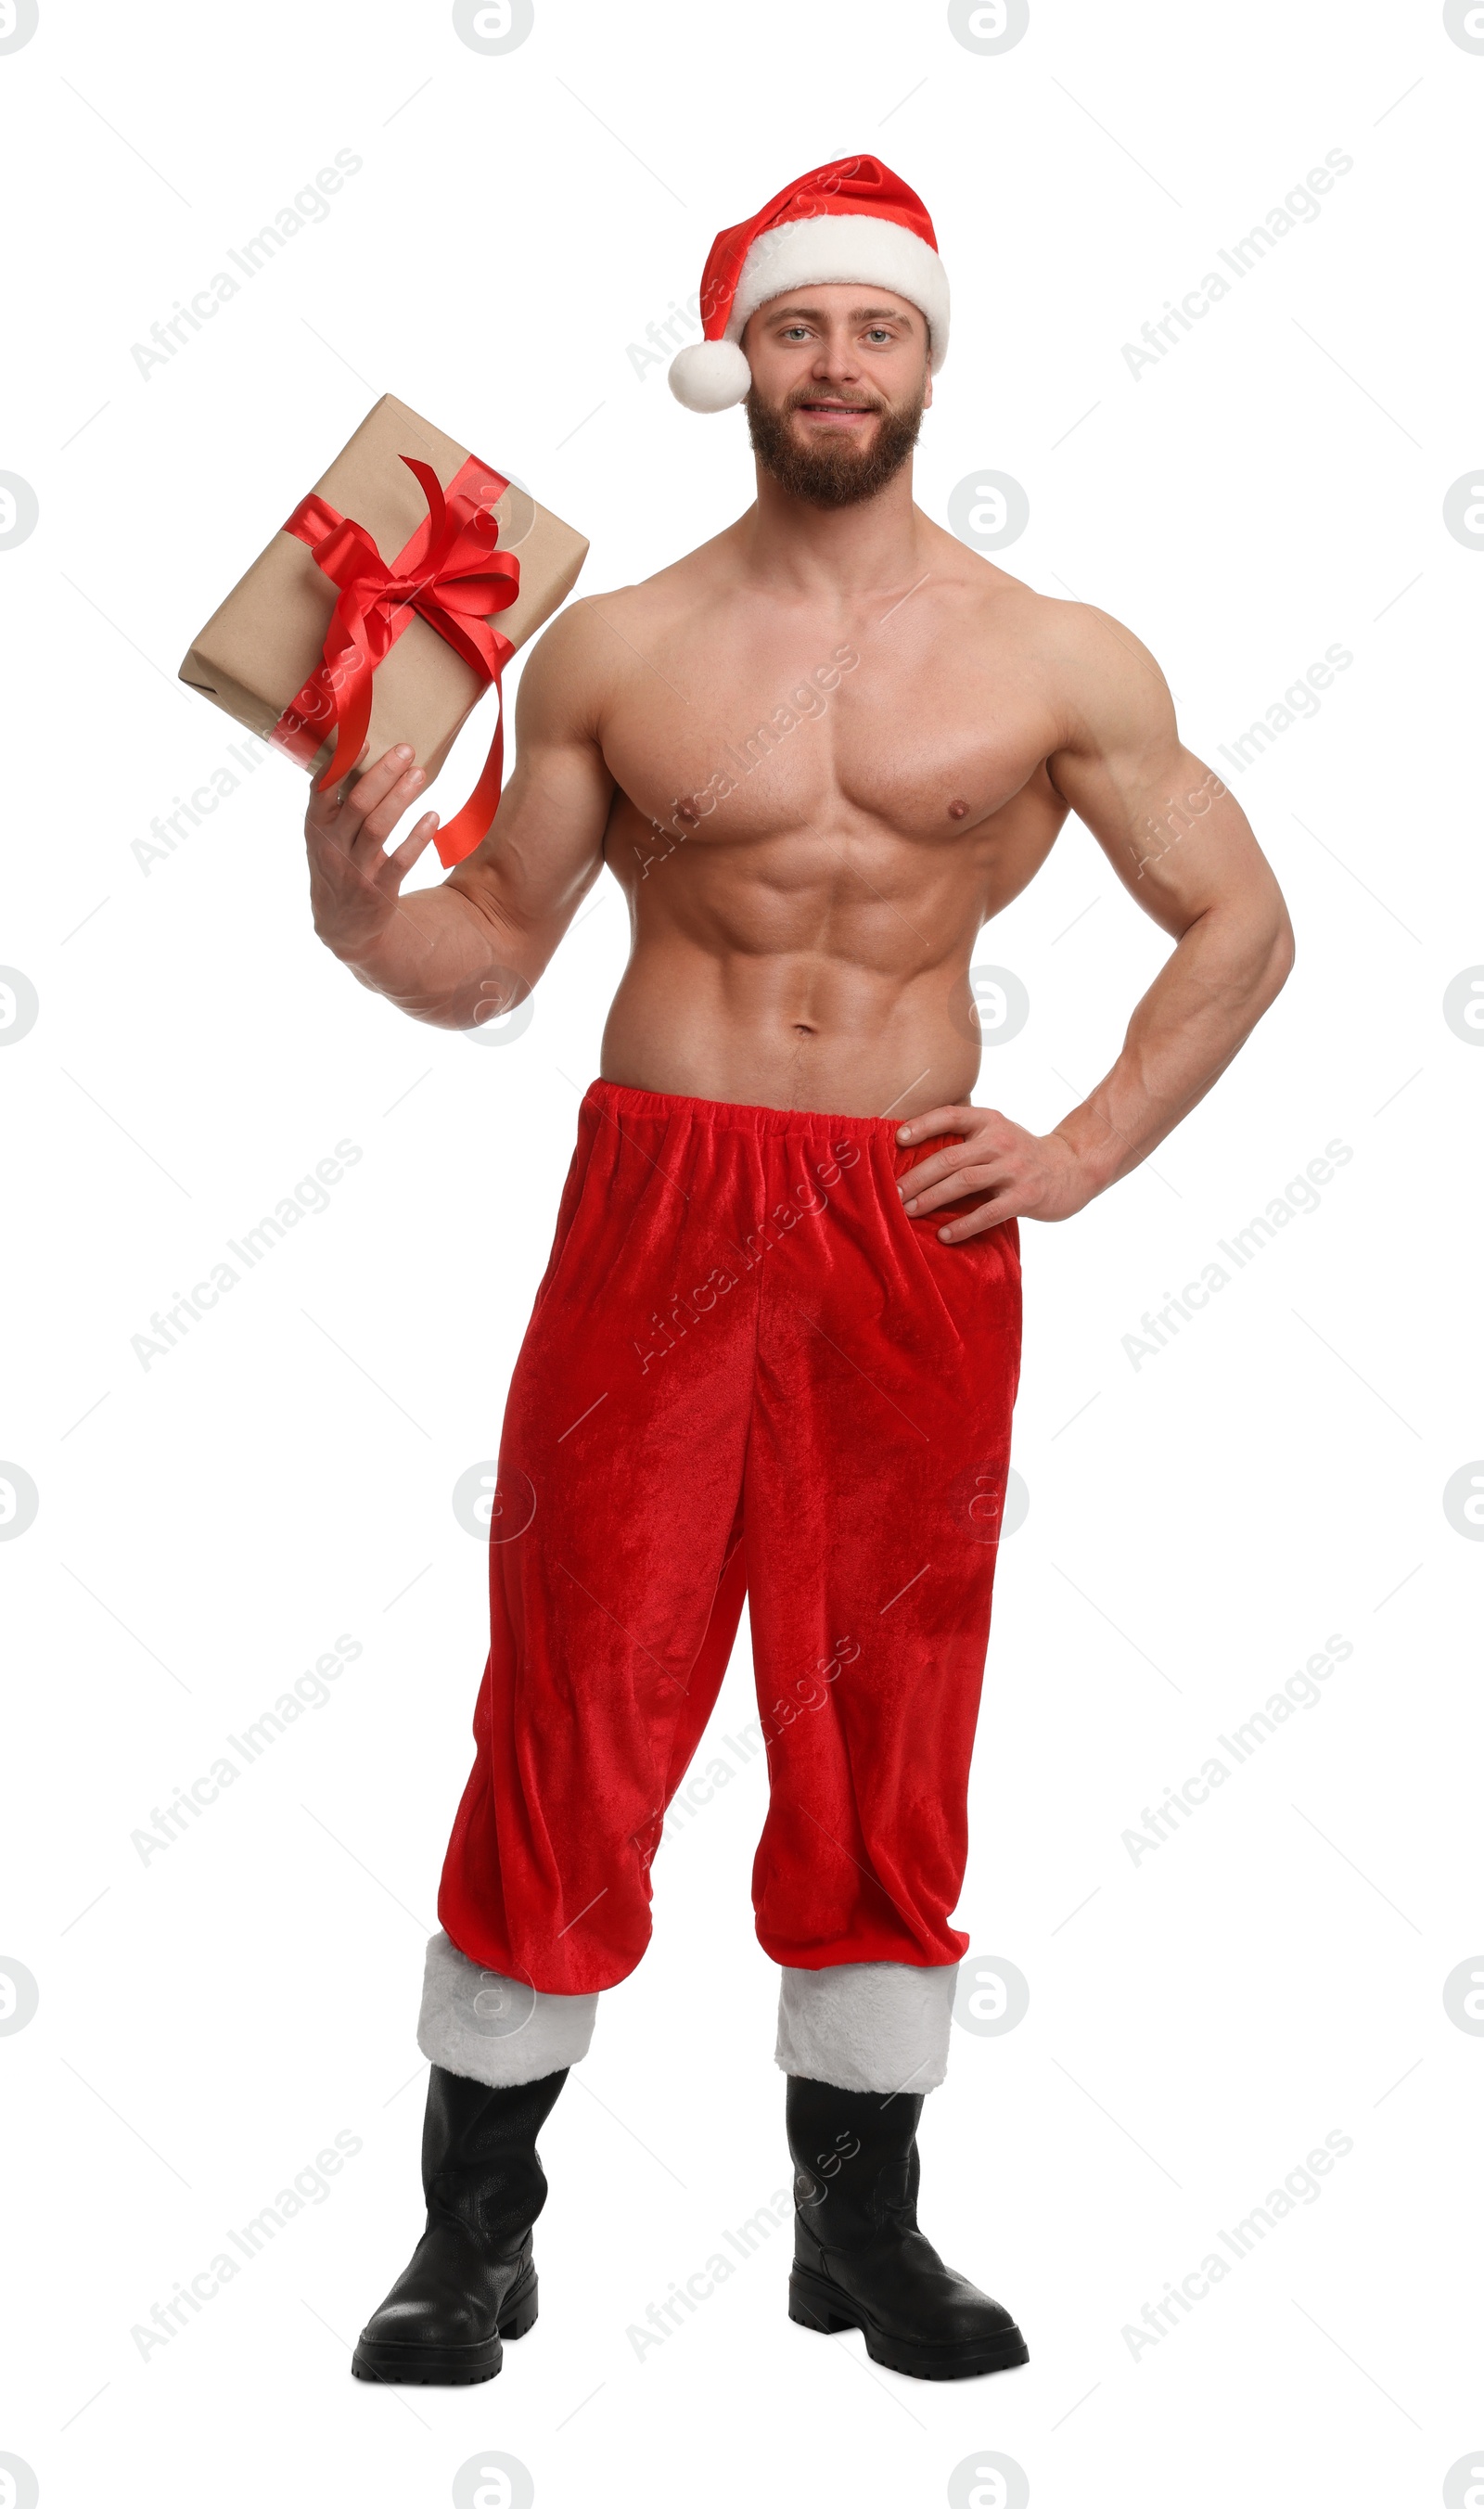 Photo of Attractive young man with muscular body in Santa hat holding Christmas gift box on white background